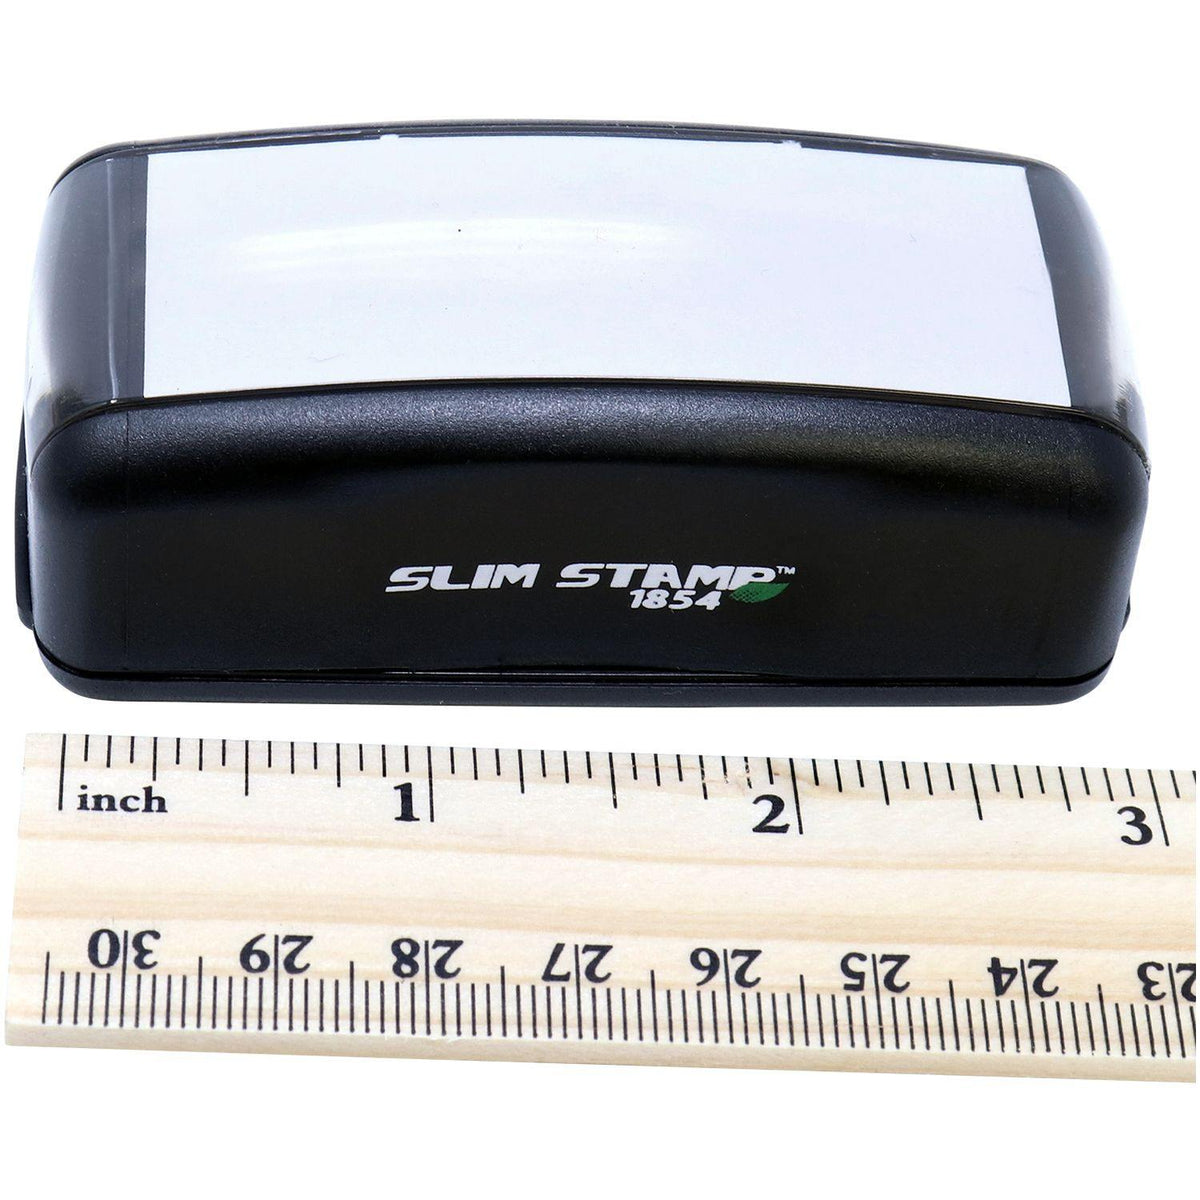 Measurement Large Pre Inked 100 Stamp with Ruler